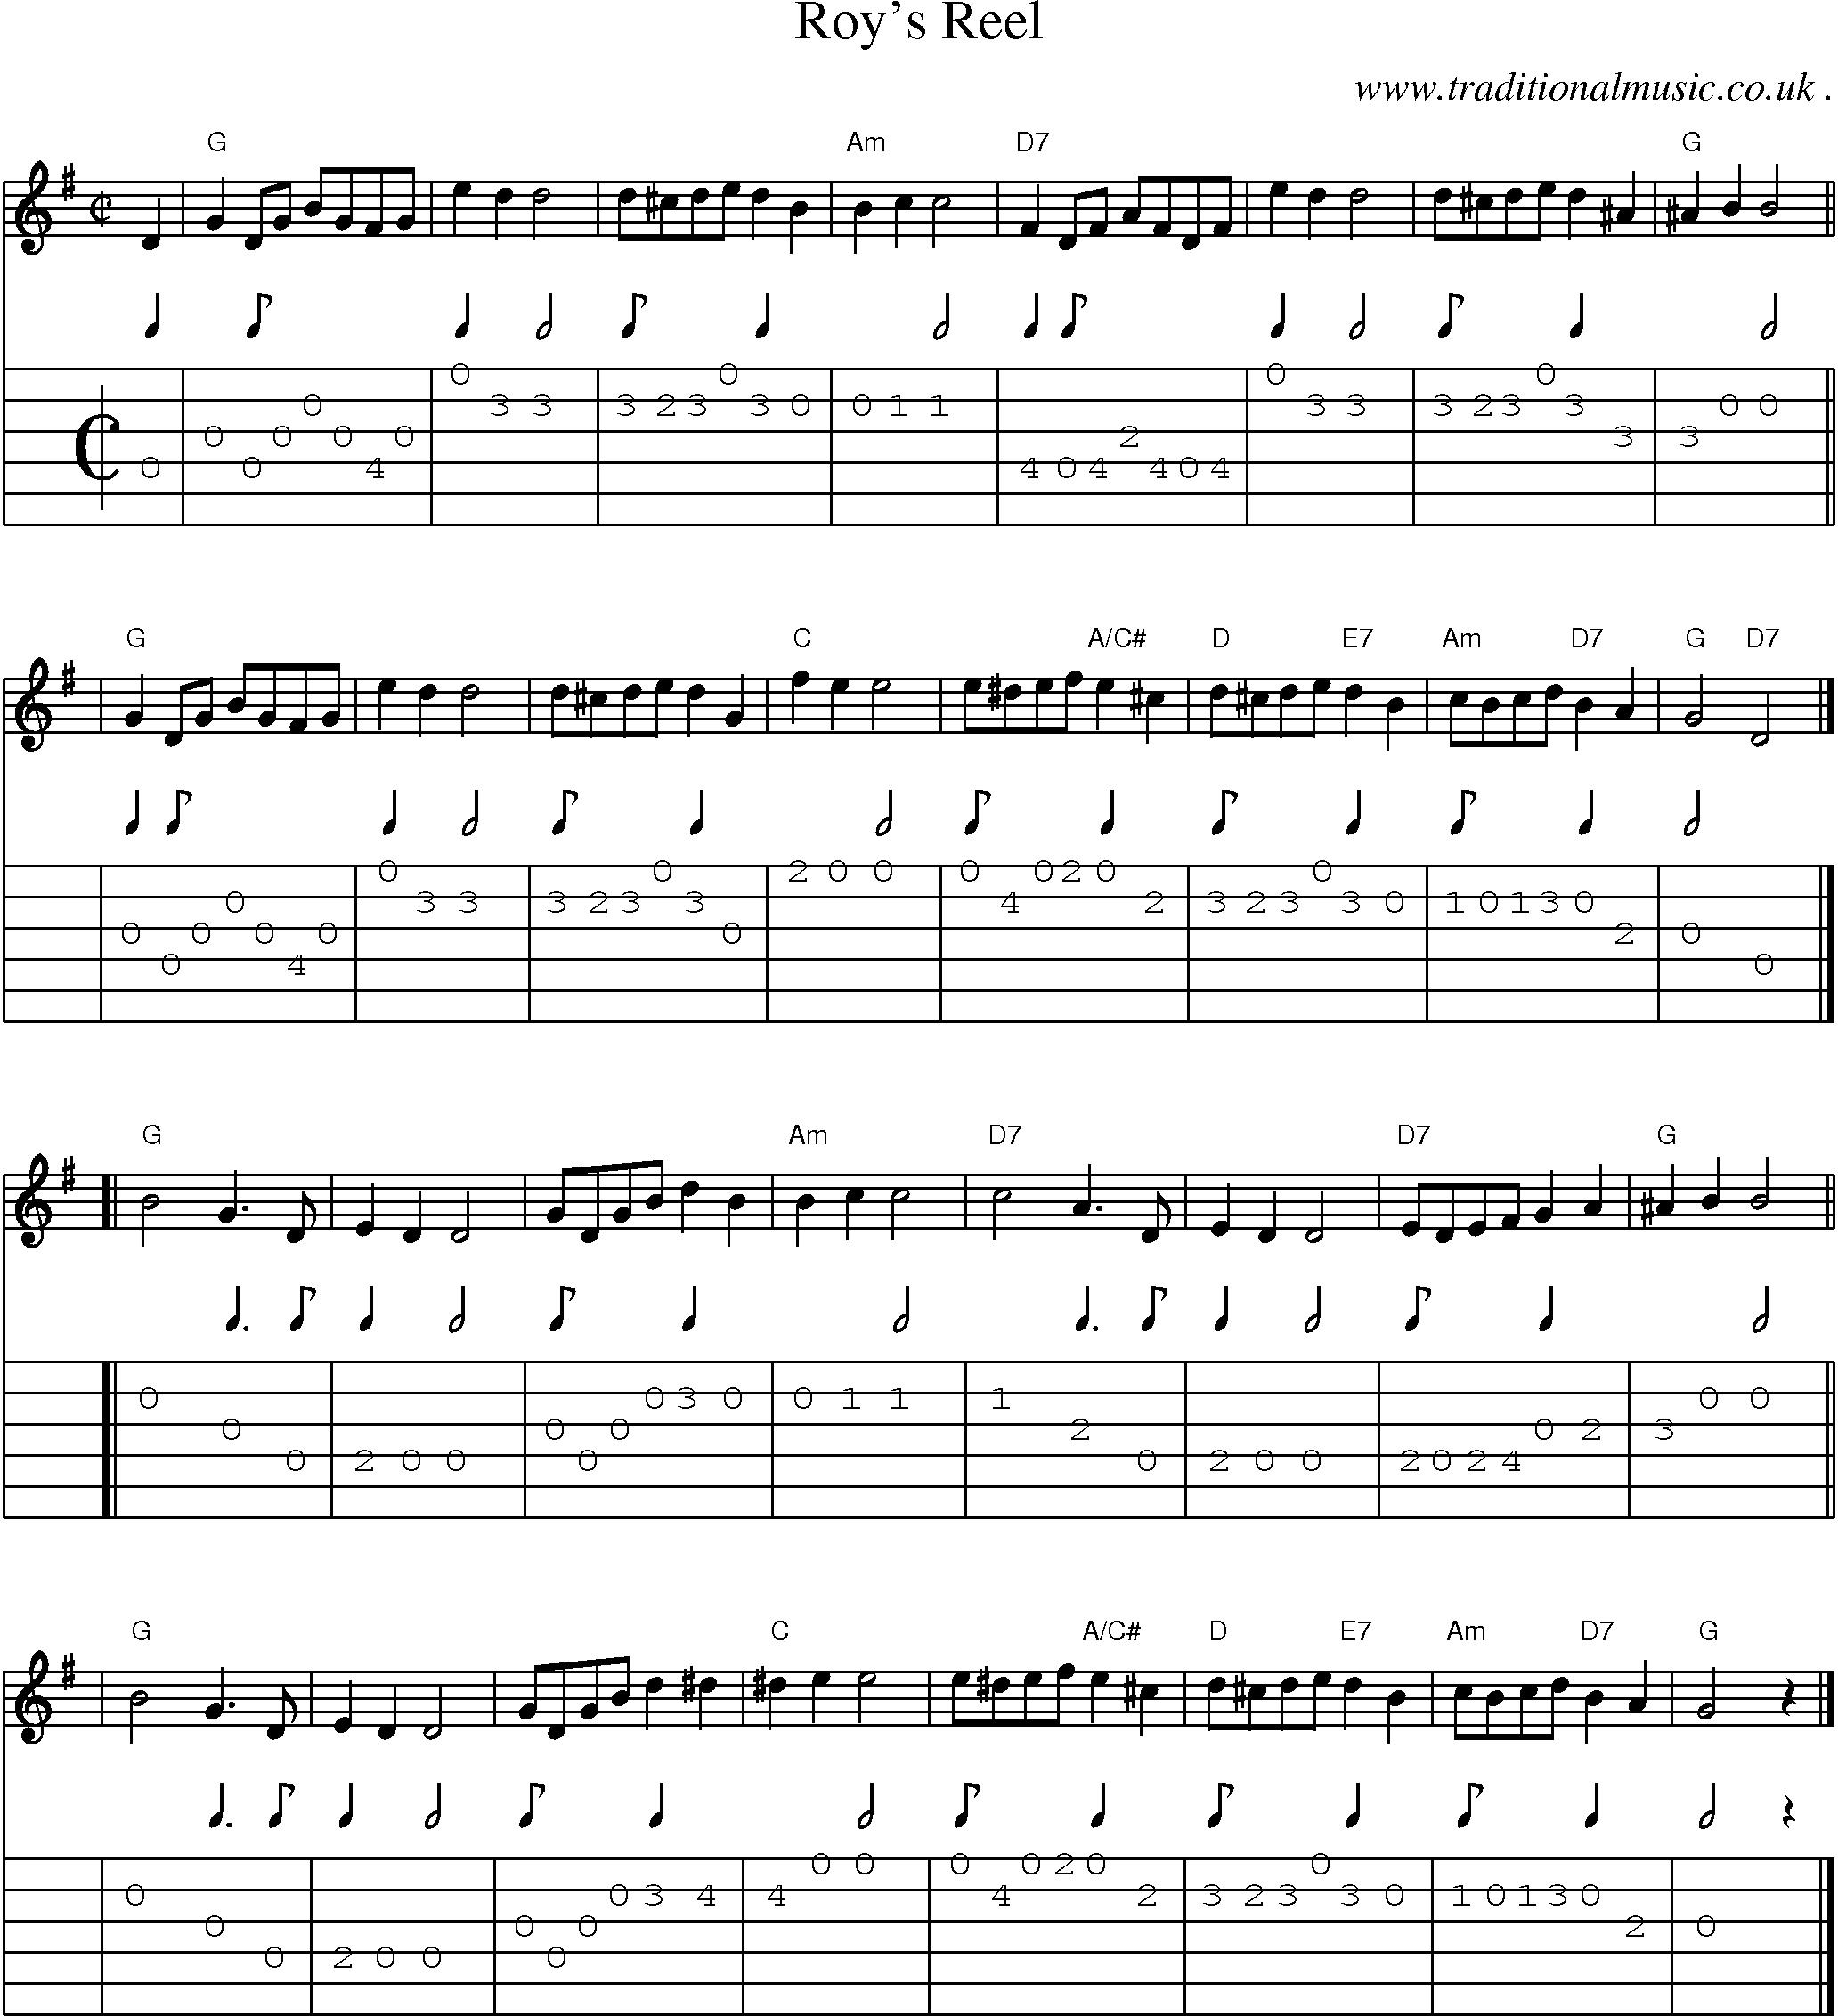 Sheet-music  score, Chords and Guitar Tabs for Roys Reel